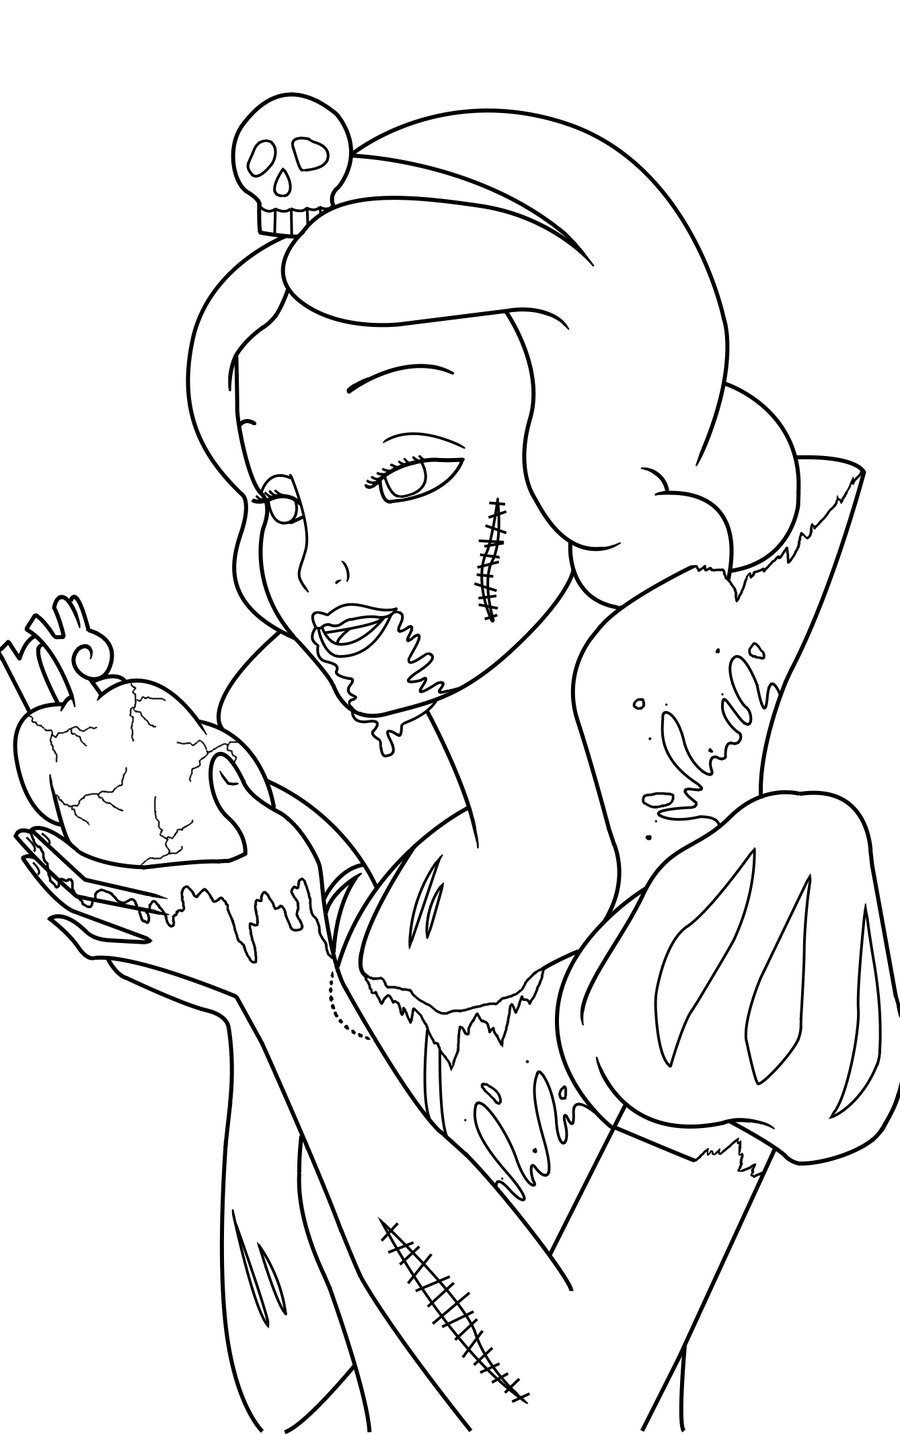 Disney Zombies Coloring Pages
 Zombie Disney Princess Coloring Pages Coloring Pages